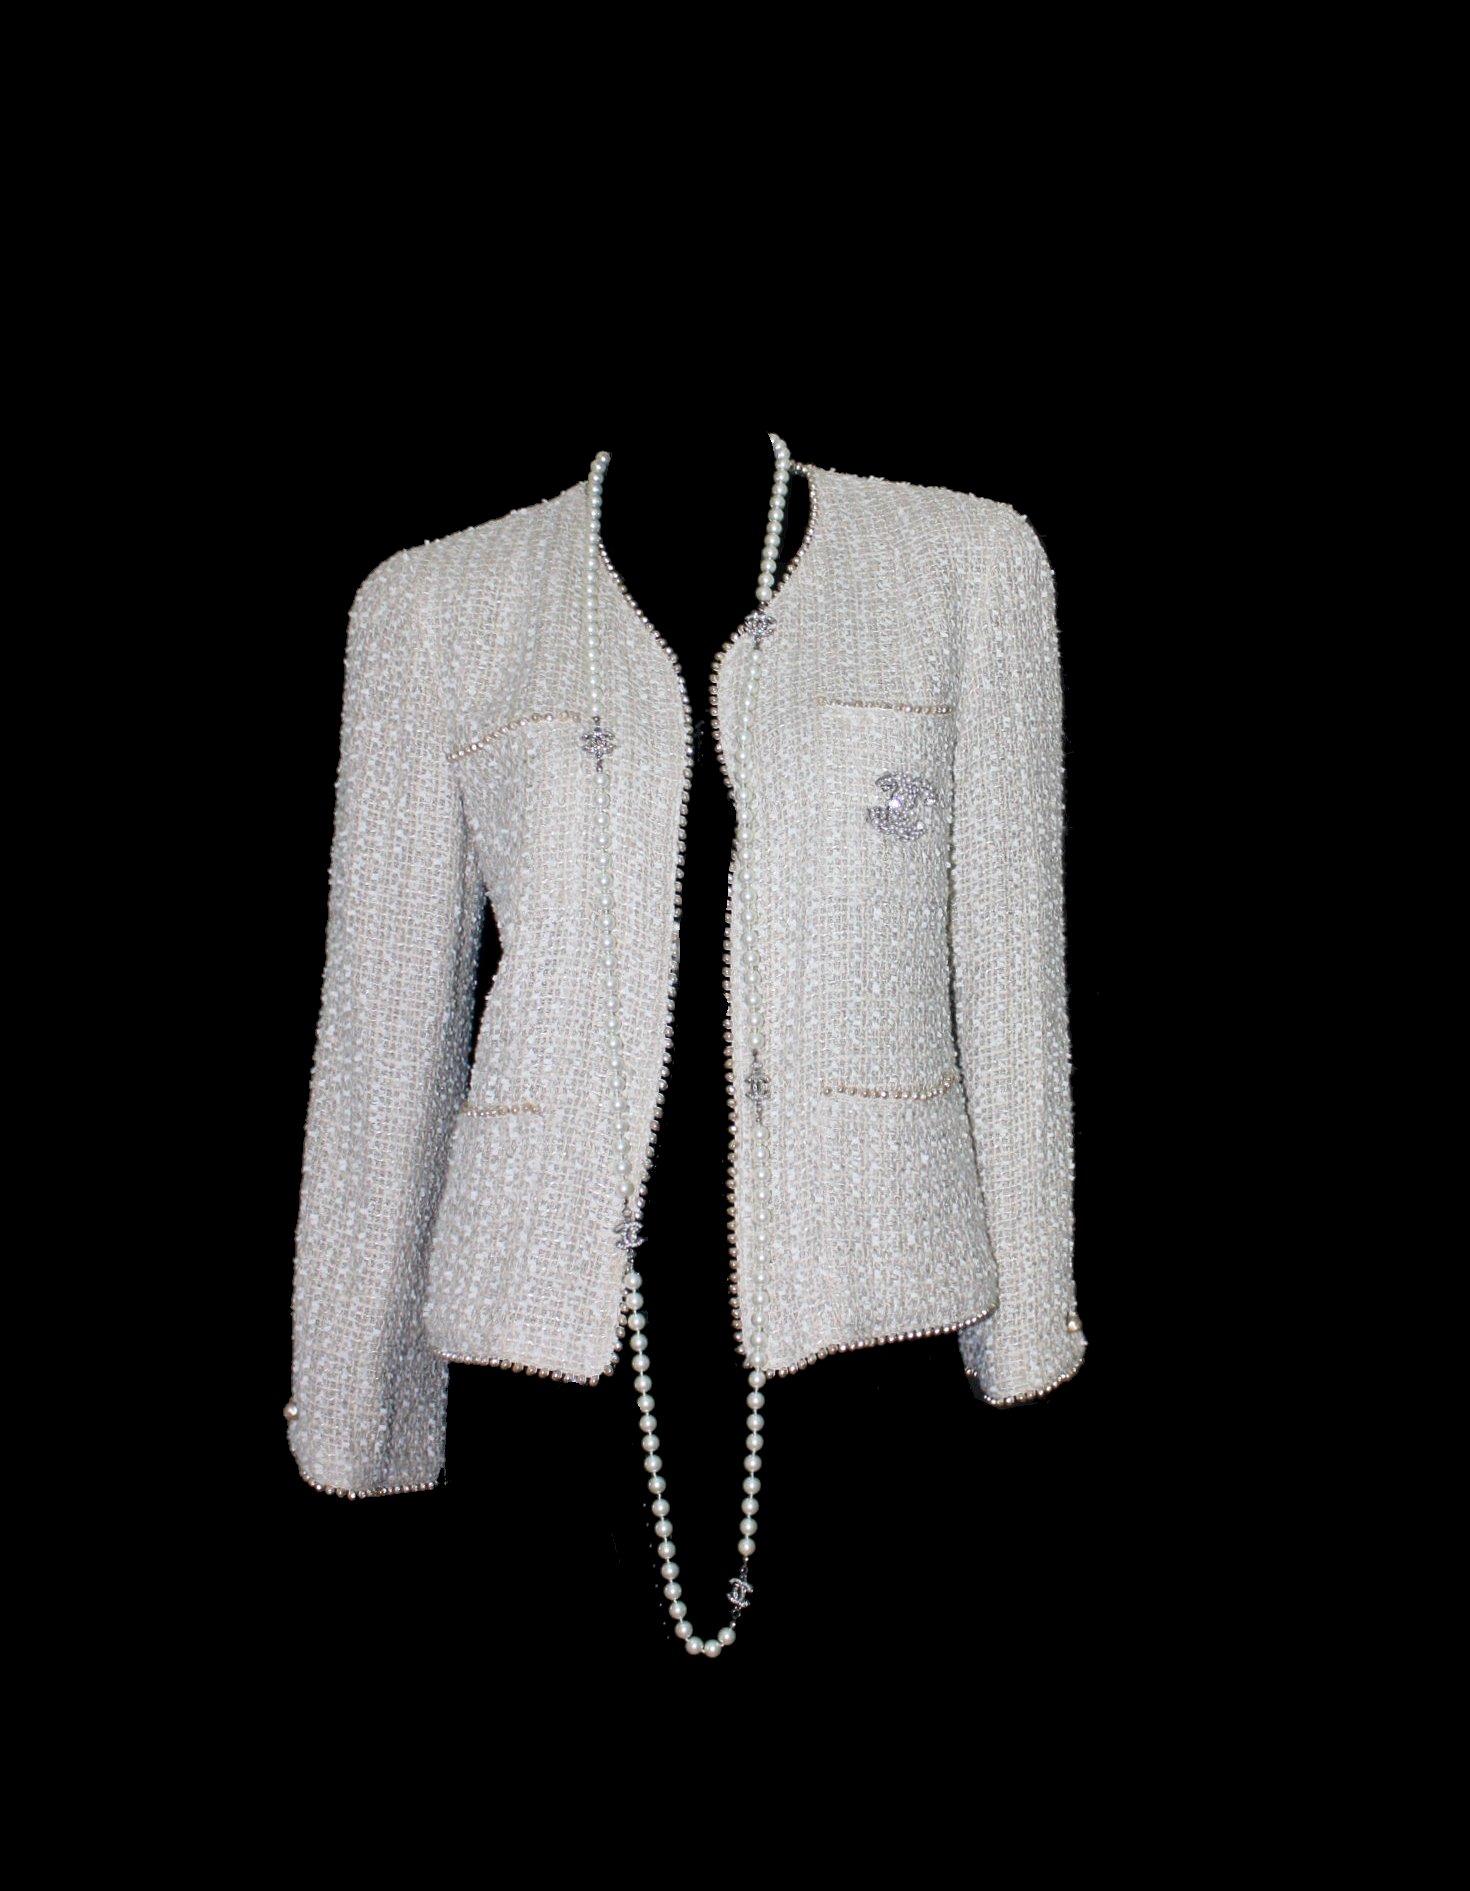 Beautiful Chanel Signature Skirt Suit
Designed by Karl Lagerfeld for Chanel
It doesn't get more COCO CHANEL than this suit
Consisting of two pieces - Skirt and Jacket
Signature fantasy tweed fabric by Maison Lesage produced exclusively for